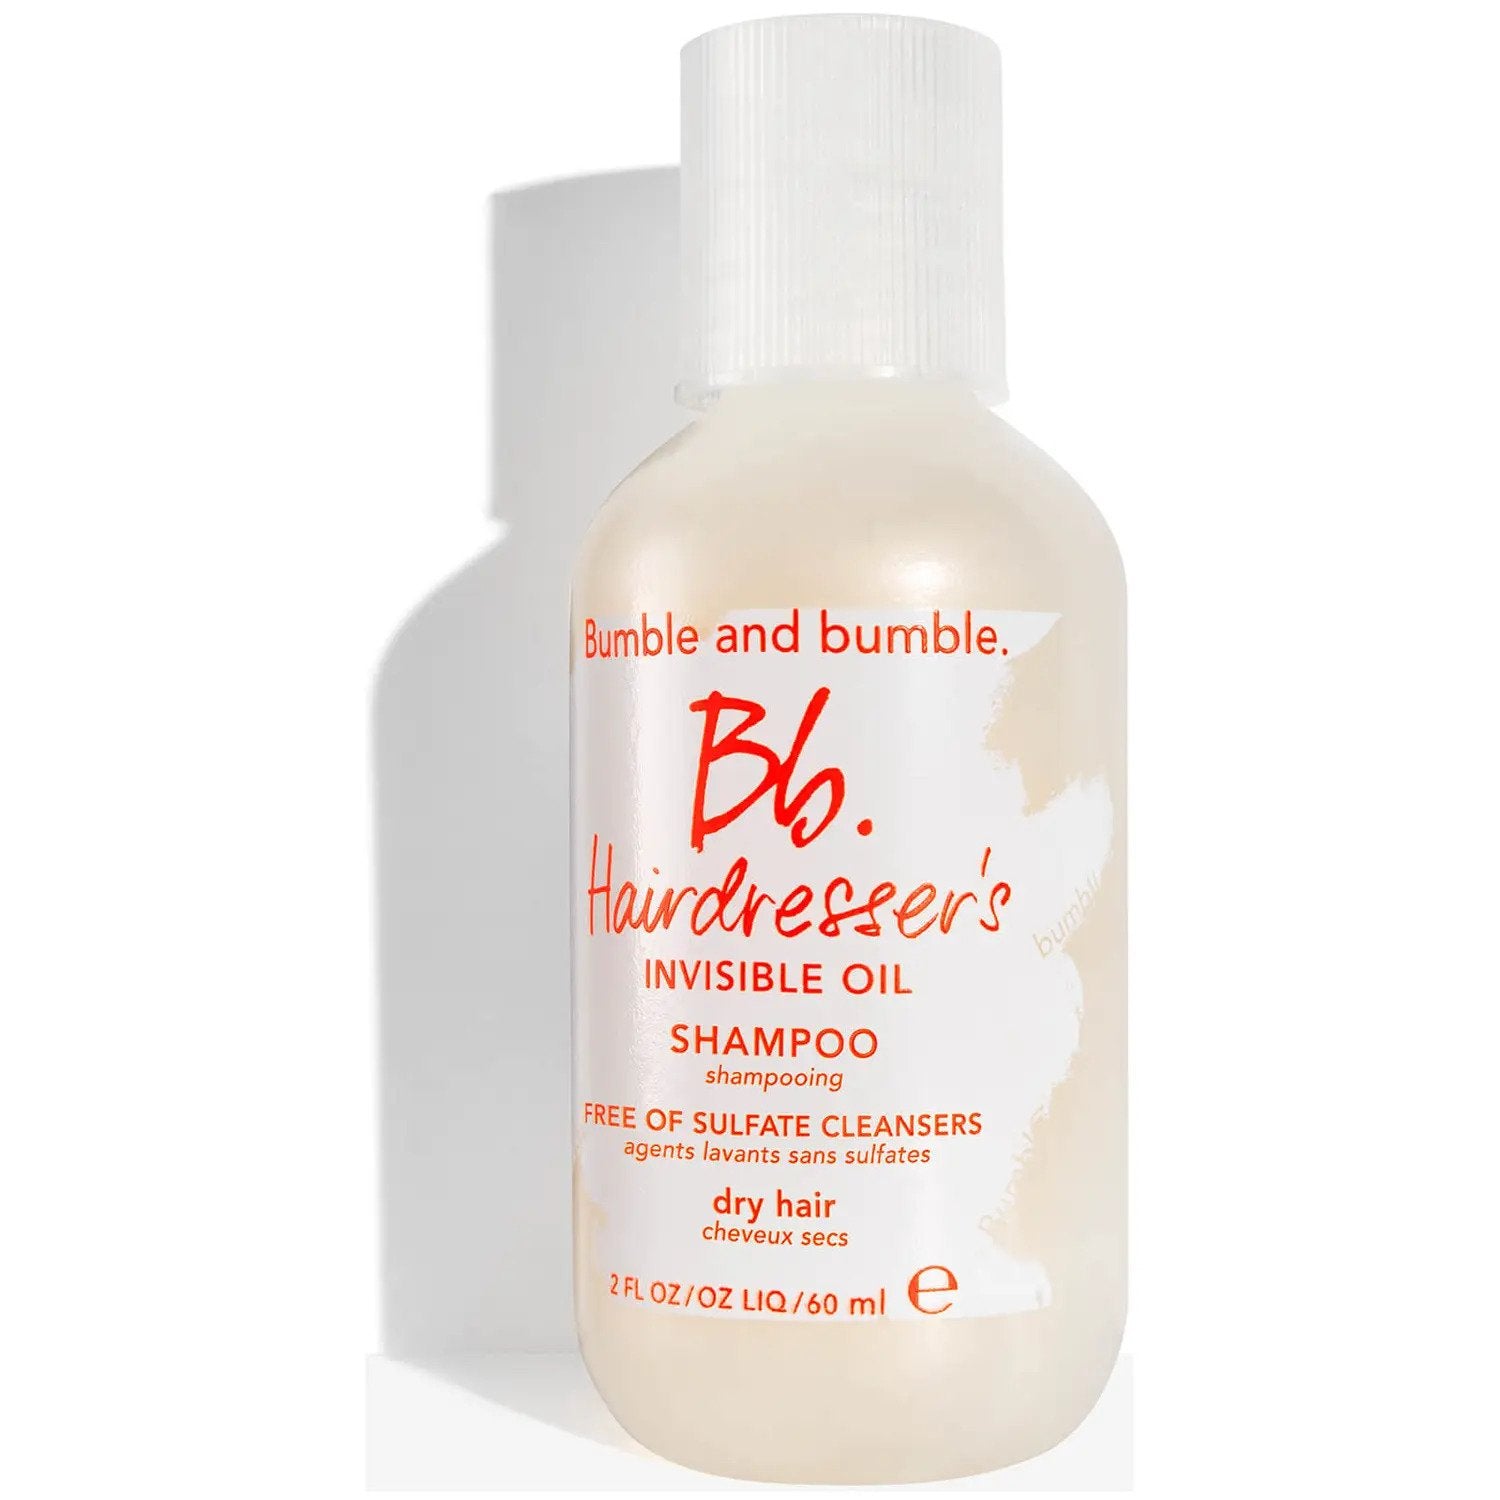 Anti-Static Shampoo - Bumble and bumble Hairdresser's Invisible Oil Sulphate Free Shampoo